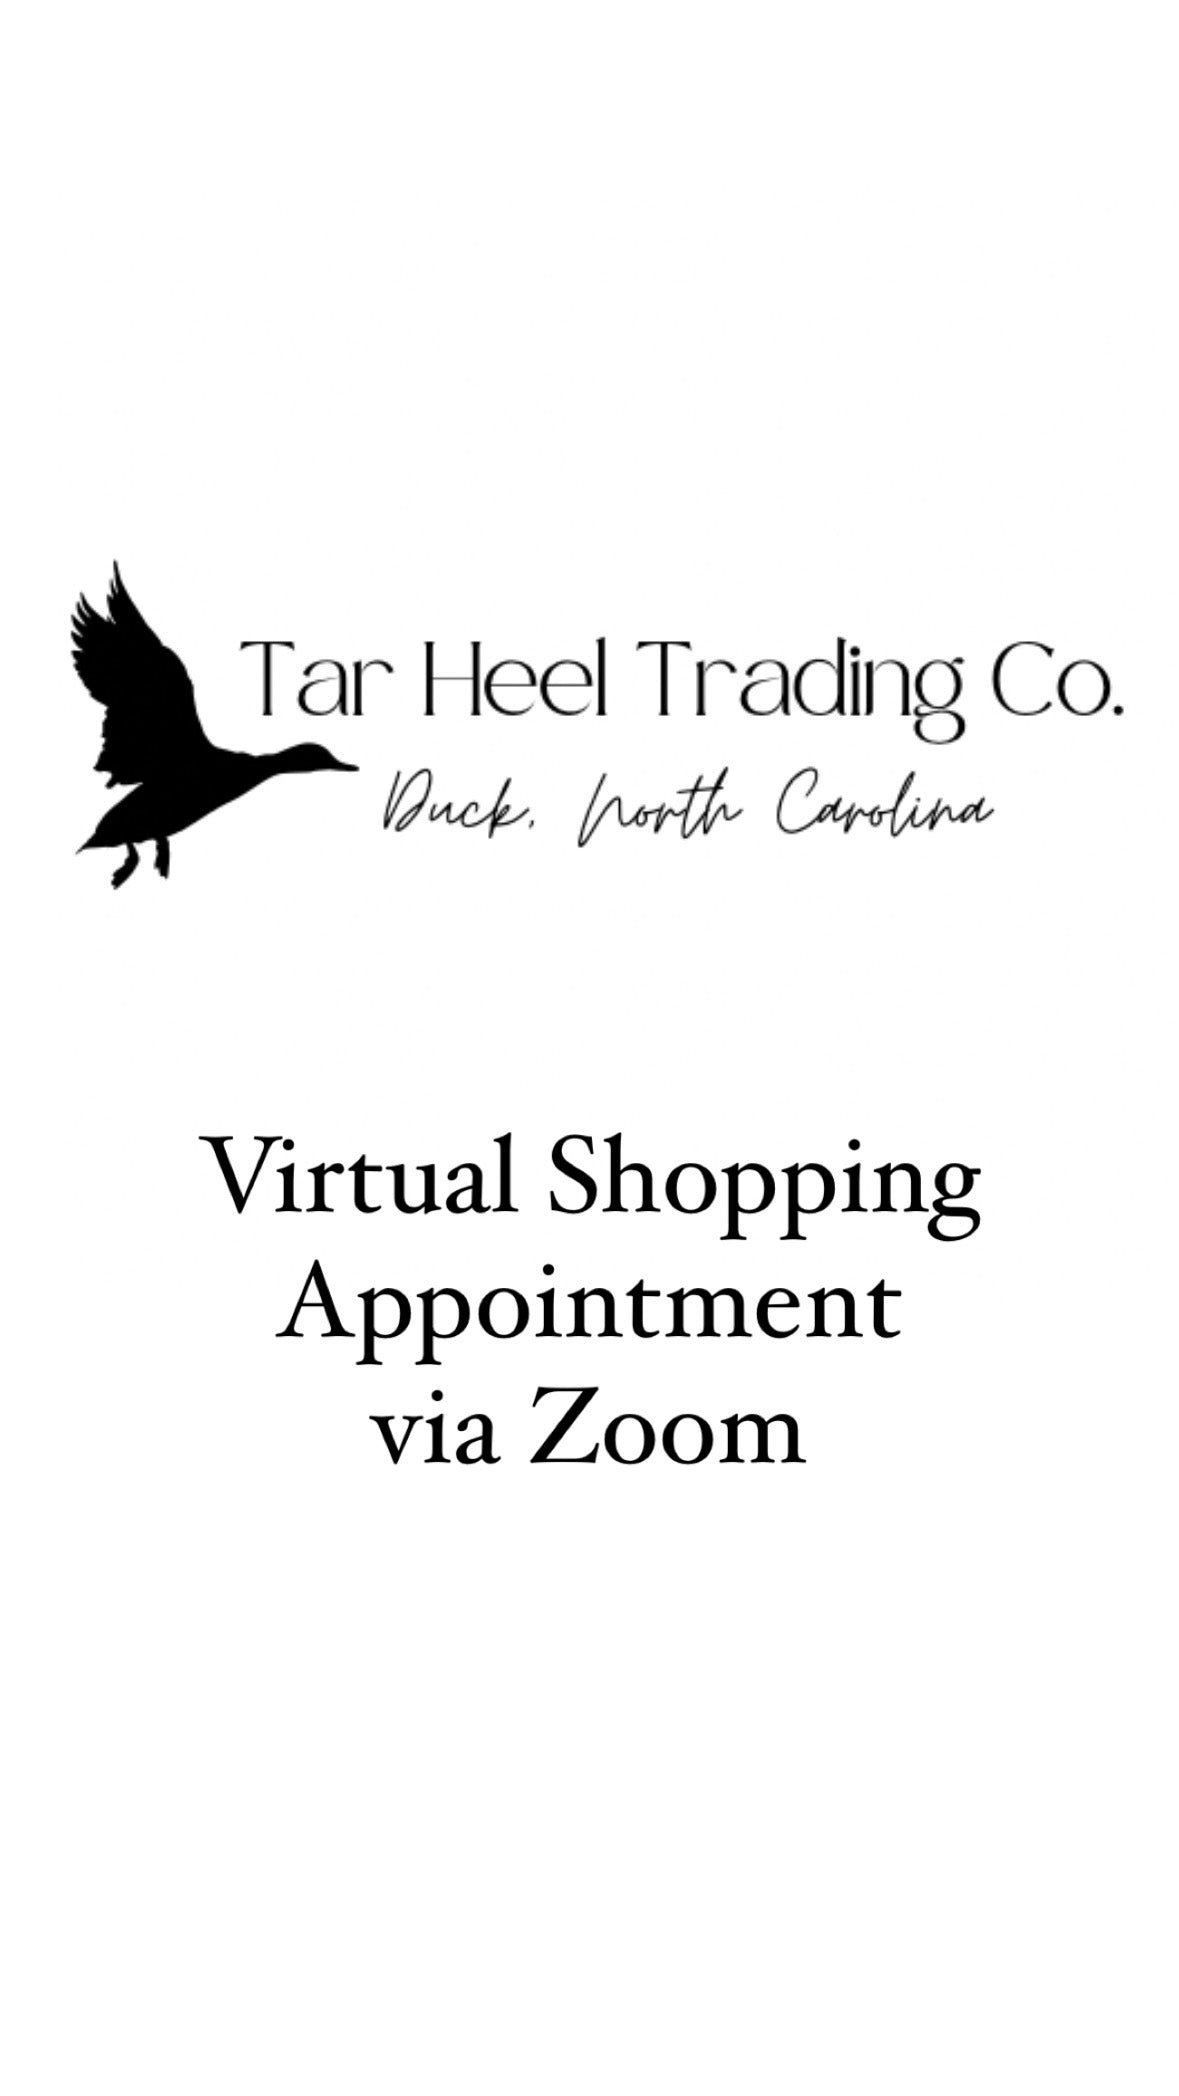 Logo Tar Heel Trading Co with duck flying explaining virtual shopping appointment